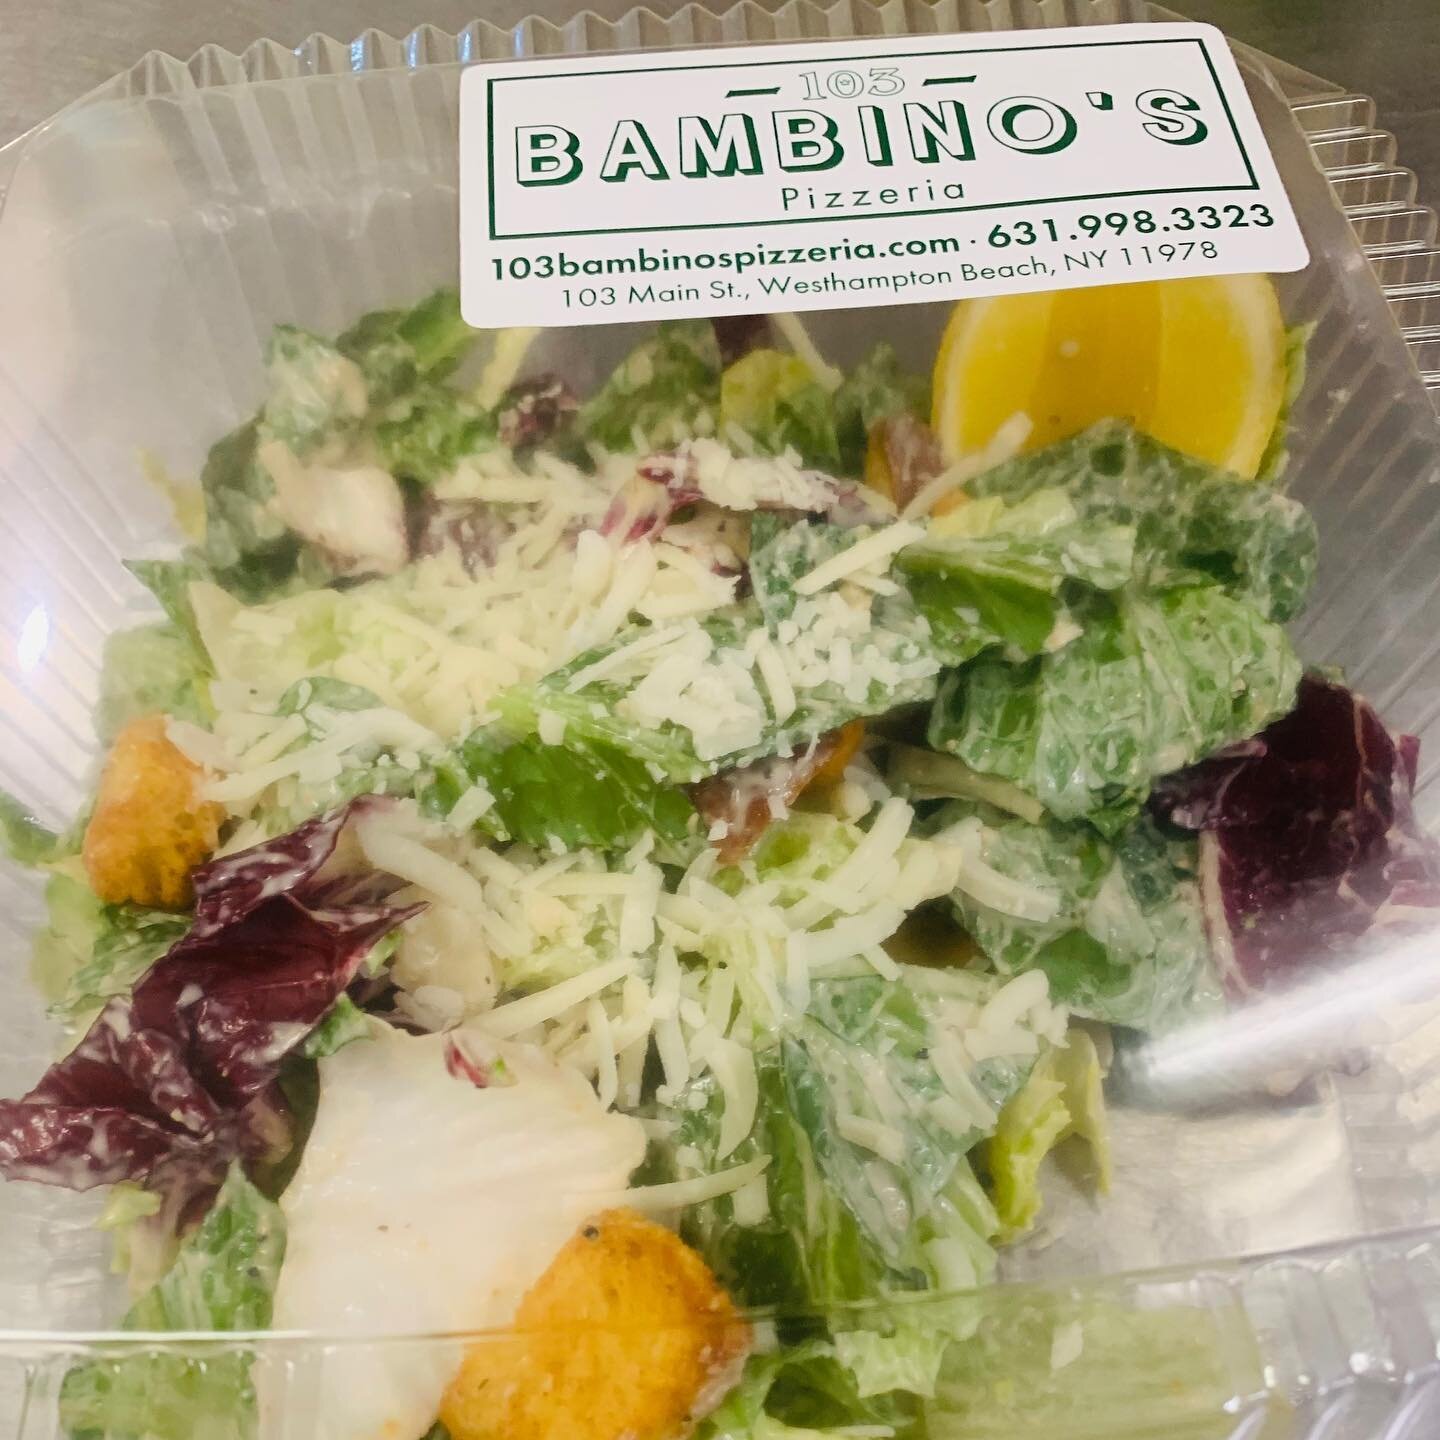 Caesar salad made to order - cool crisp and refreshing! 
We&rsquo;re open 7 days a week.